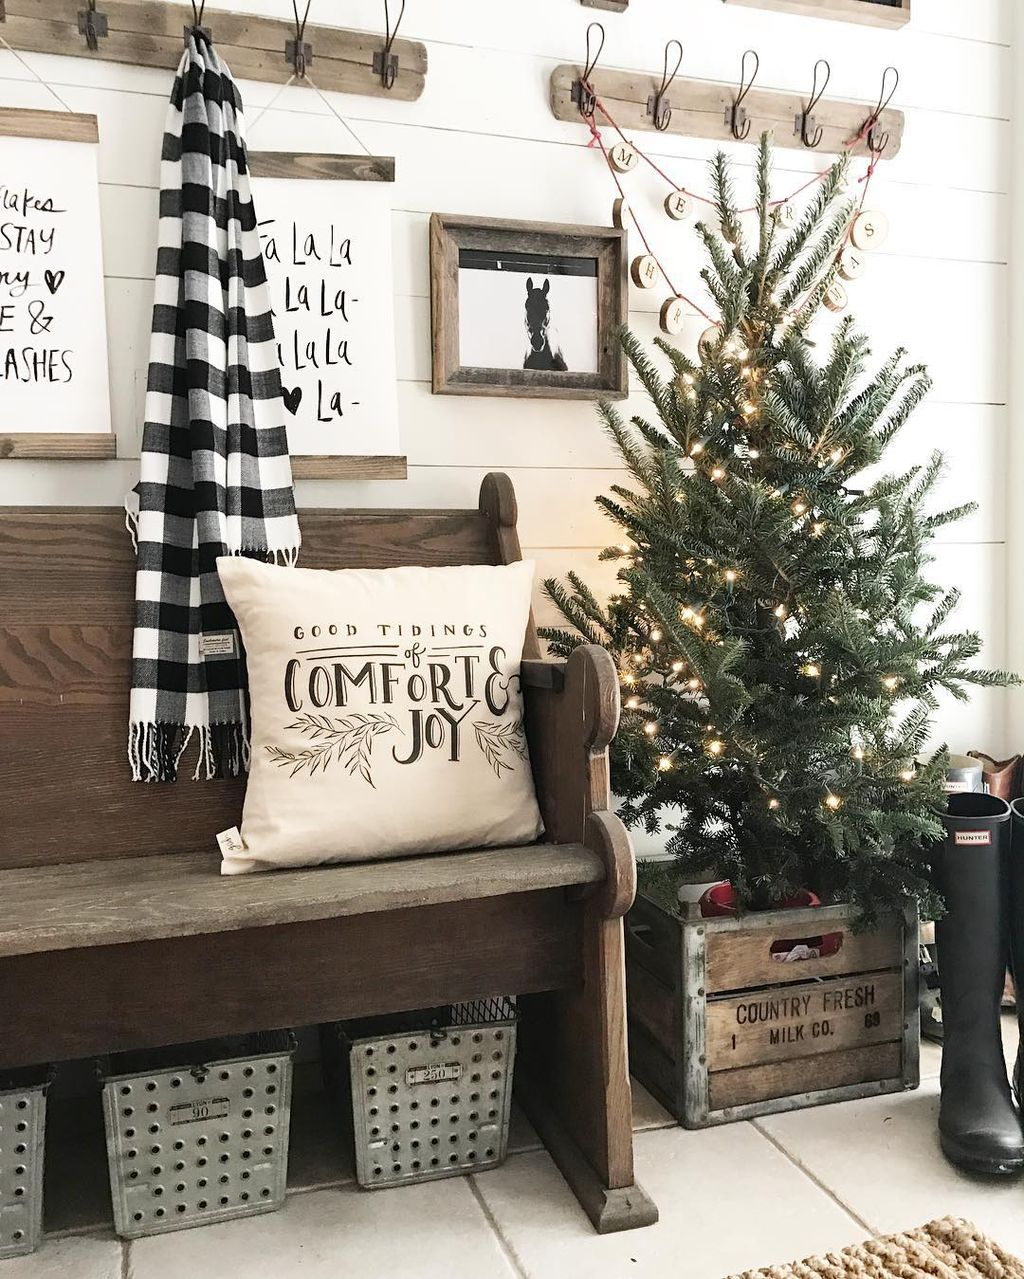 Inspiring Rustic Christmas Tree Decoration Ideas For Cheerful Day 46